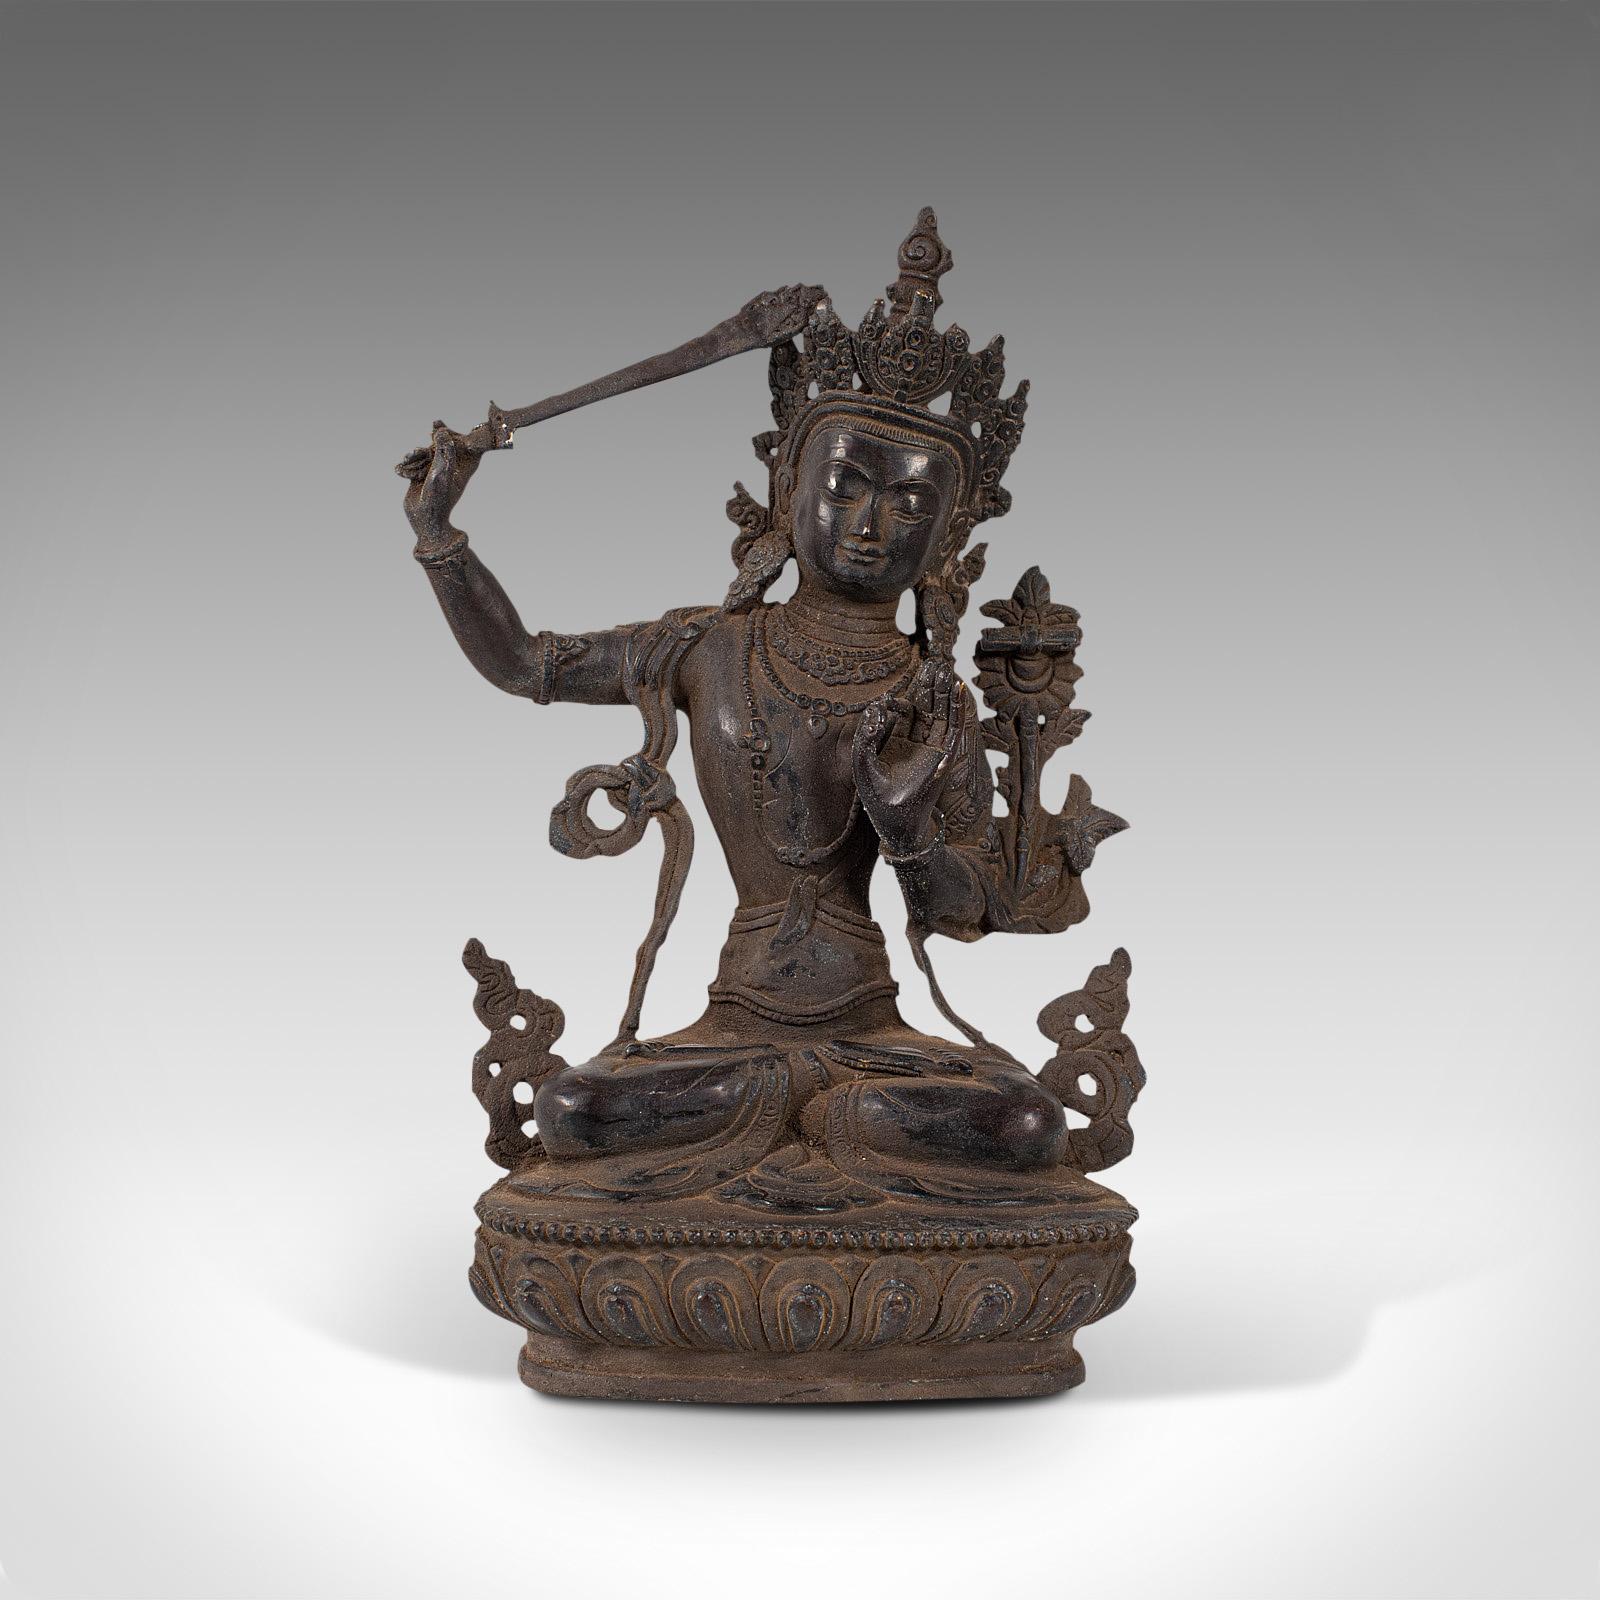 This is an antique Manjushri statue. An Oriental, bronze figure of the seated deity Wenshu, dating to the late 19th century, circa 1900.

Pleasingly tall statue of the Buddhist deity
Displaying a desirable, delightfully patinated